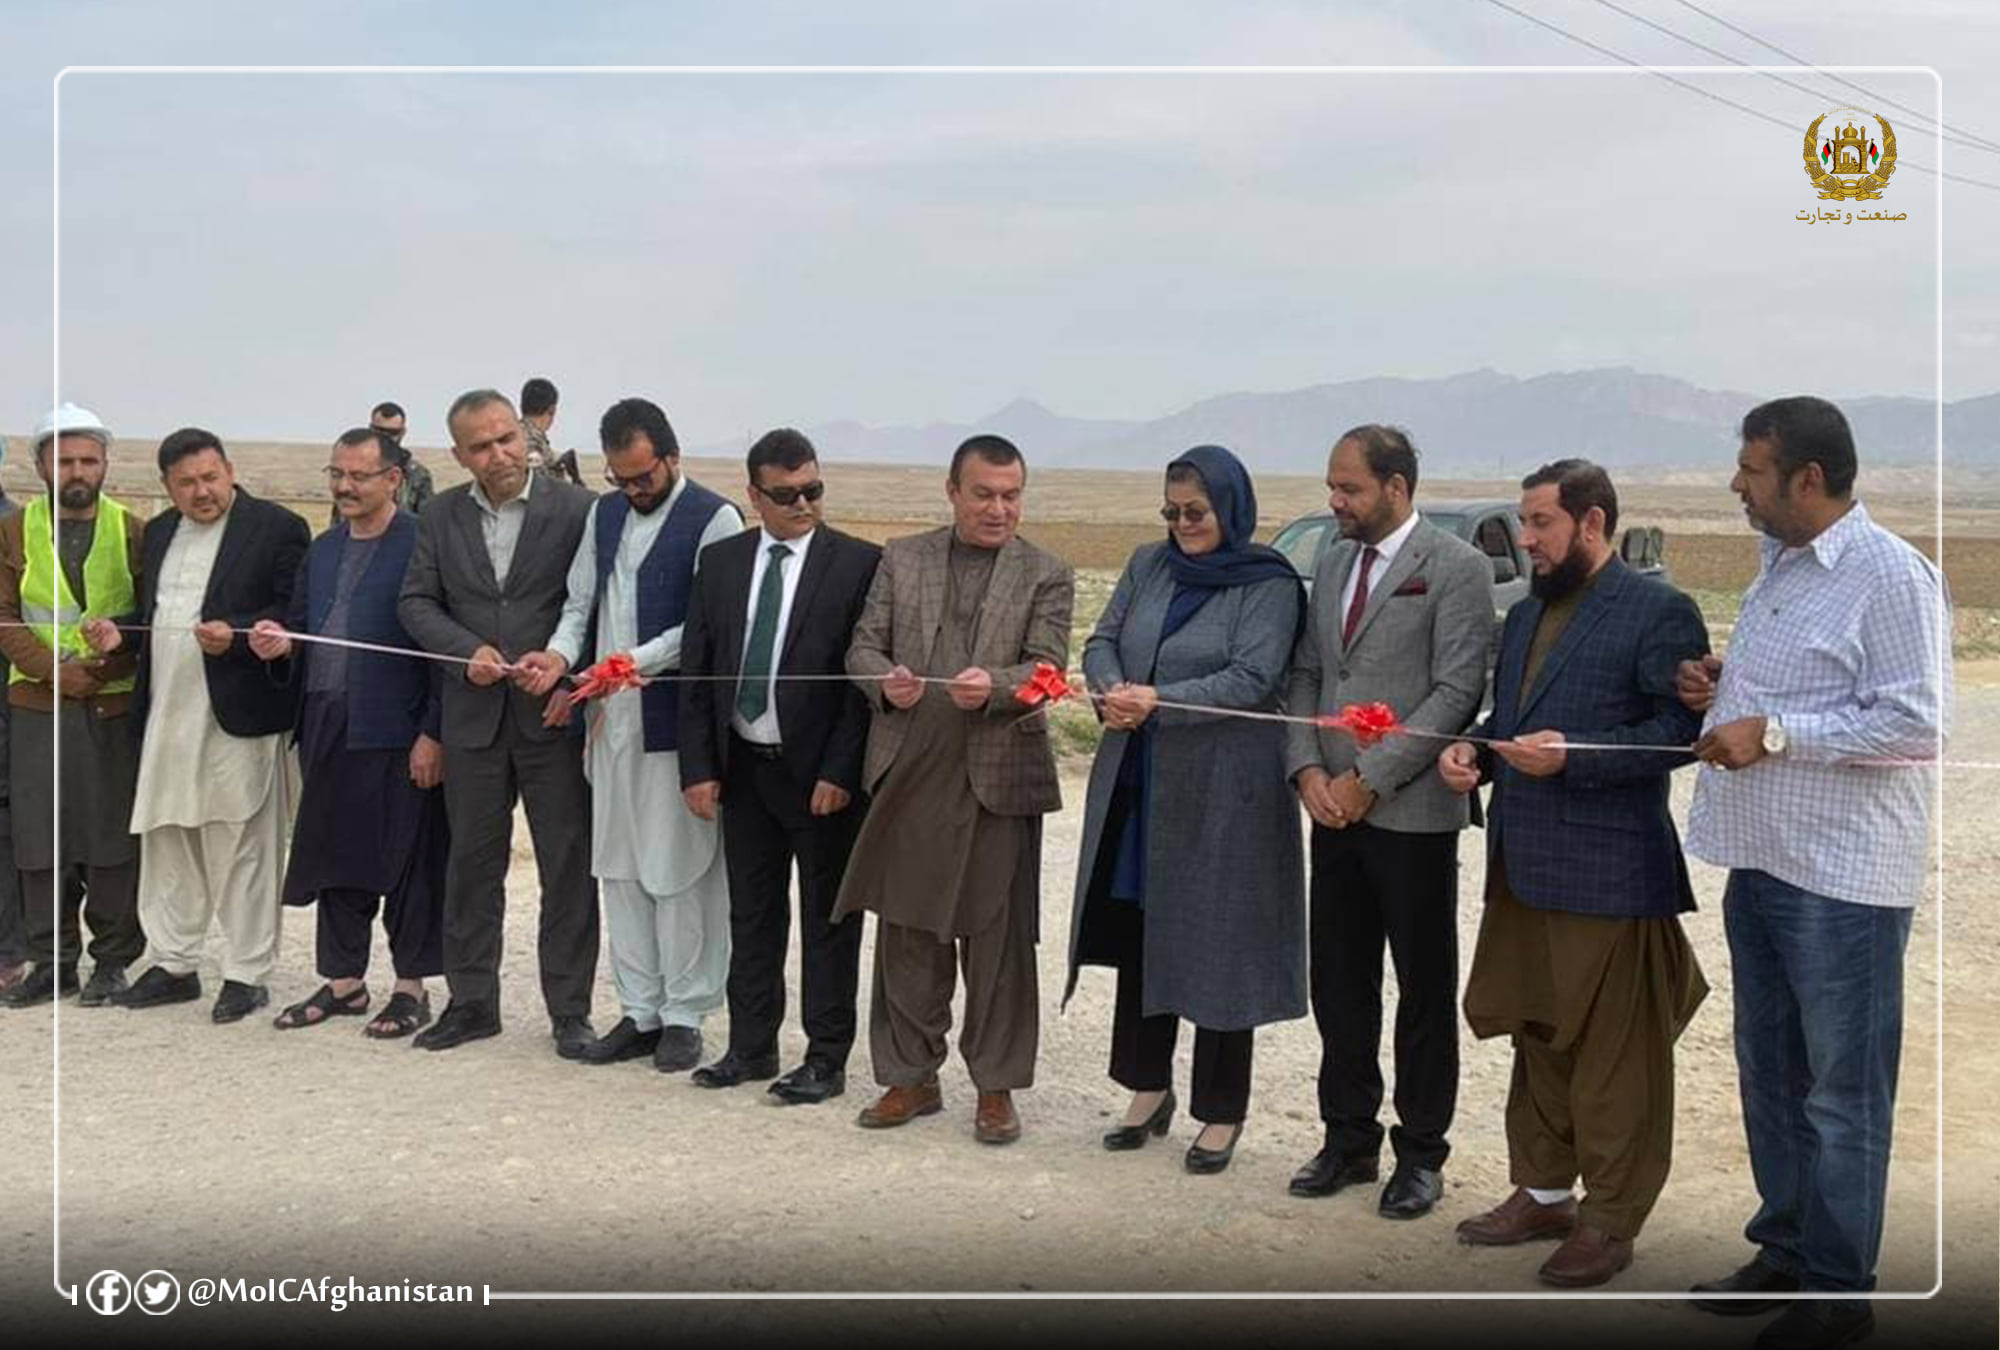 Inauguration of Amir Ali Shir Nawaye Industrial Park Road Infrastructure Construction Project in Balkh Province